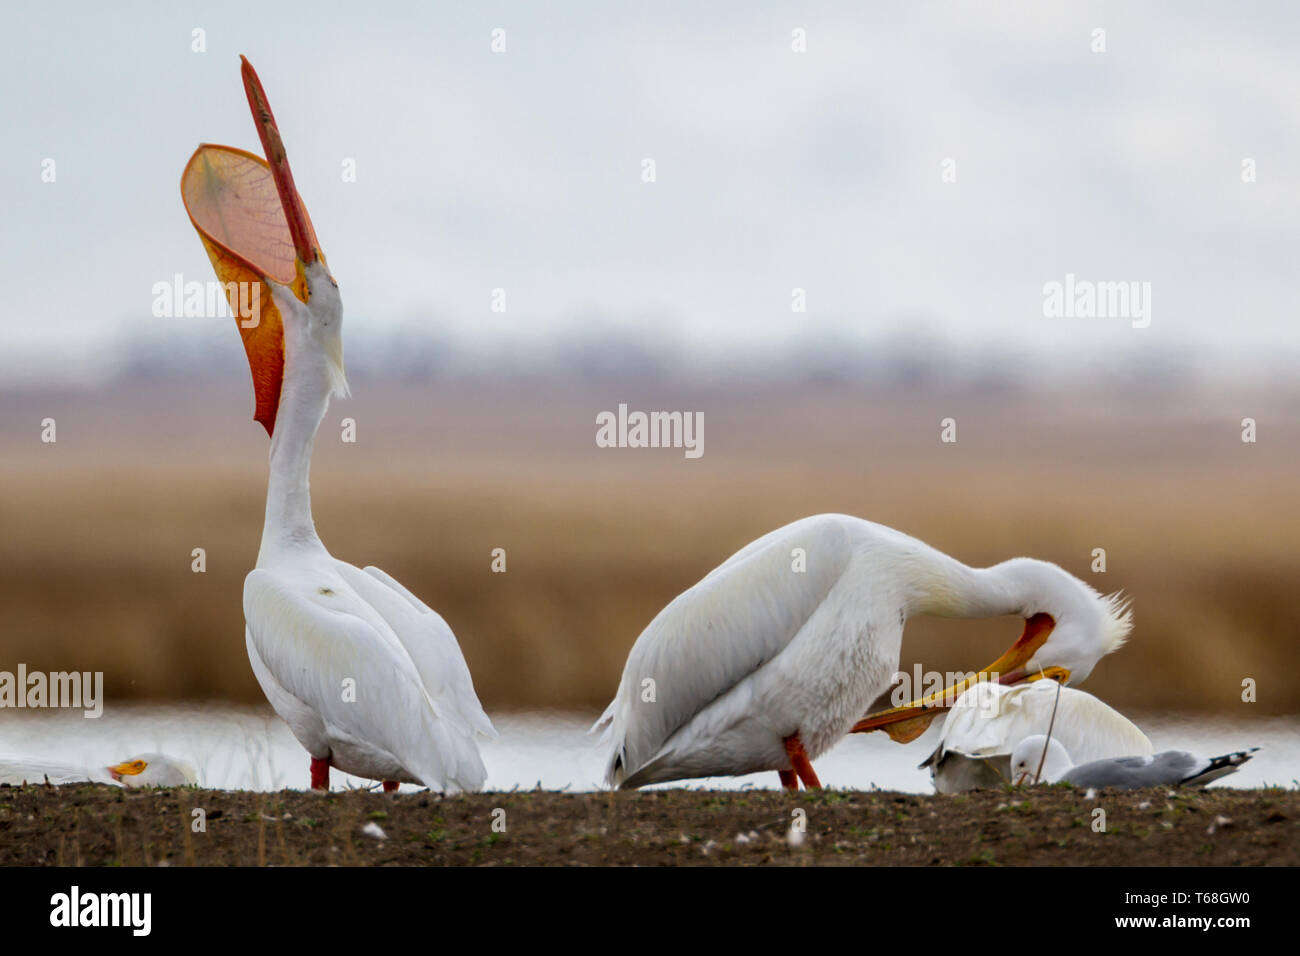 White pelicans, Pelecanidae, in springtime at Frank Lake near High River, Alberta, Canada, with 1 displaying open pouch Stock Photo